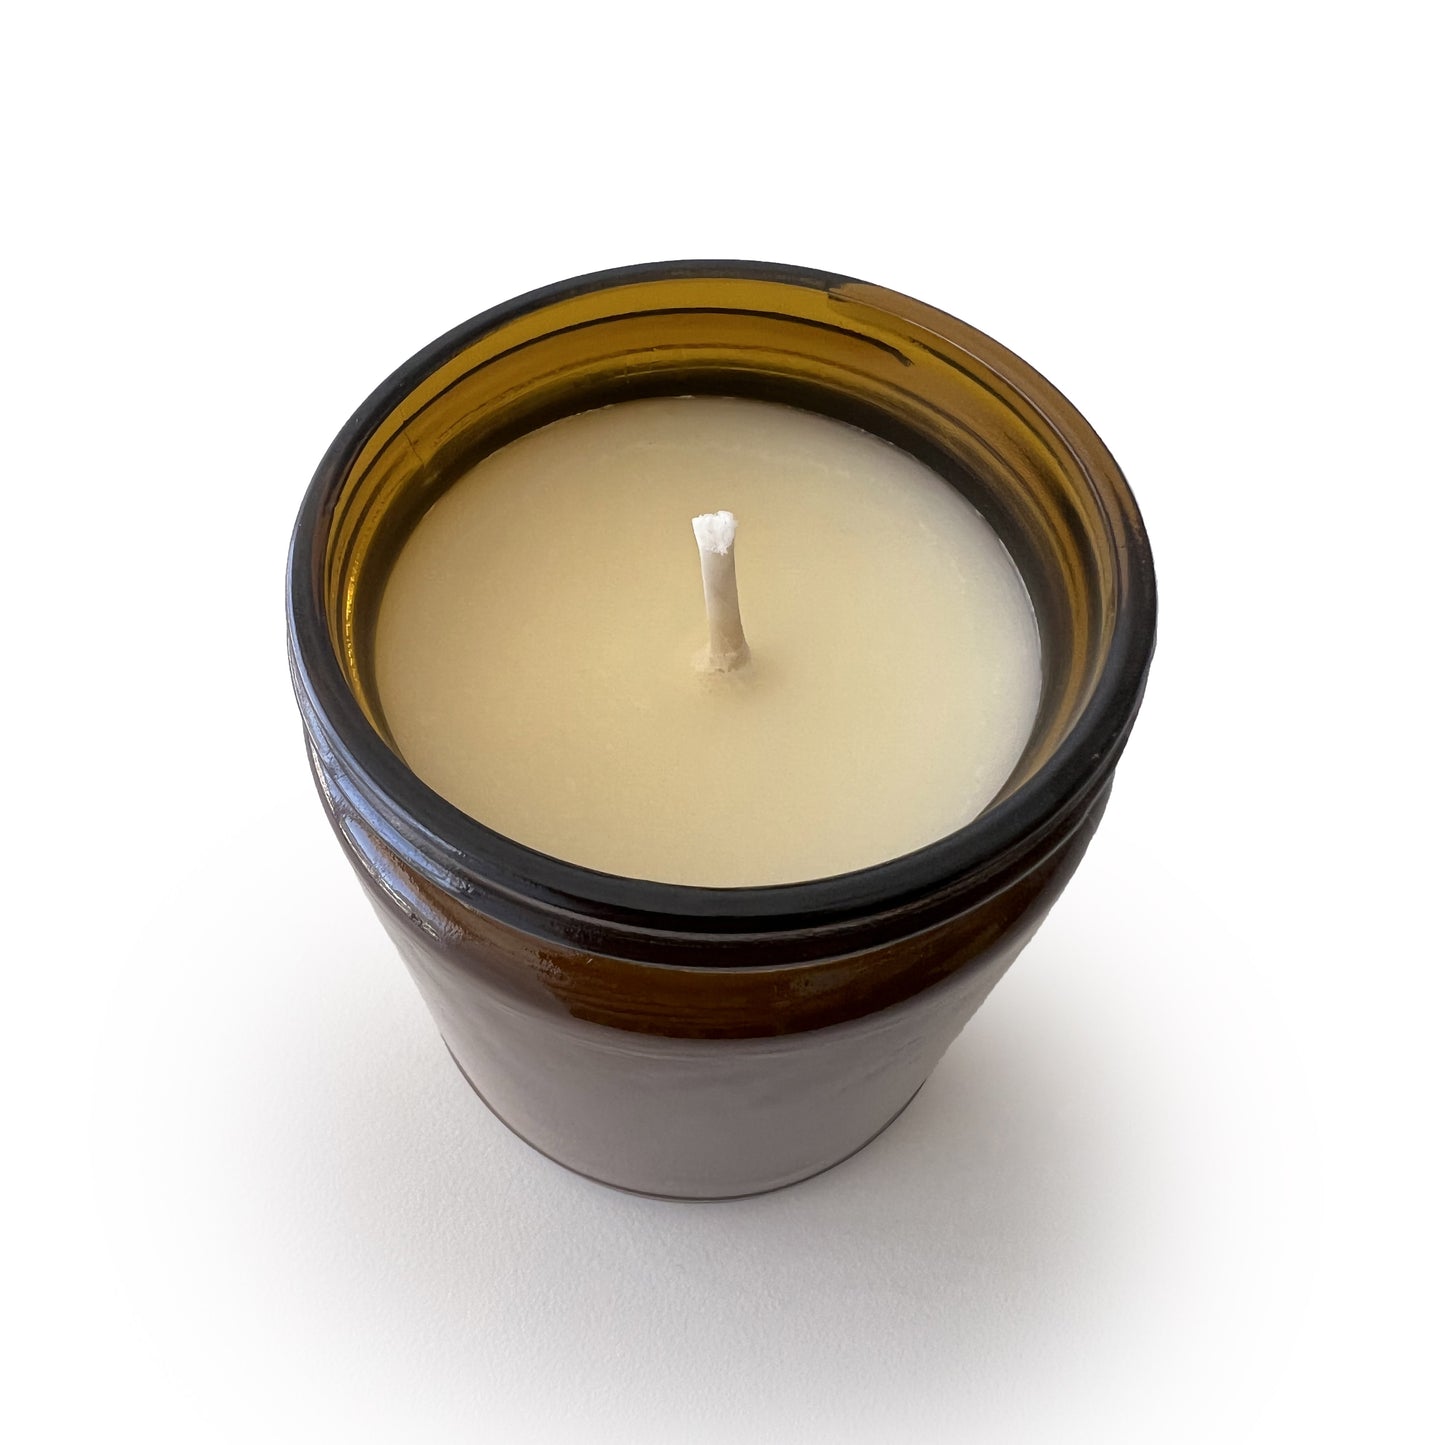 Fall Collection 8-pack - Soy Candles 9oz